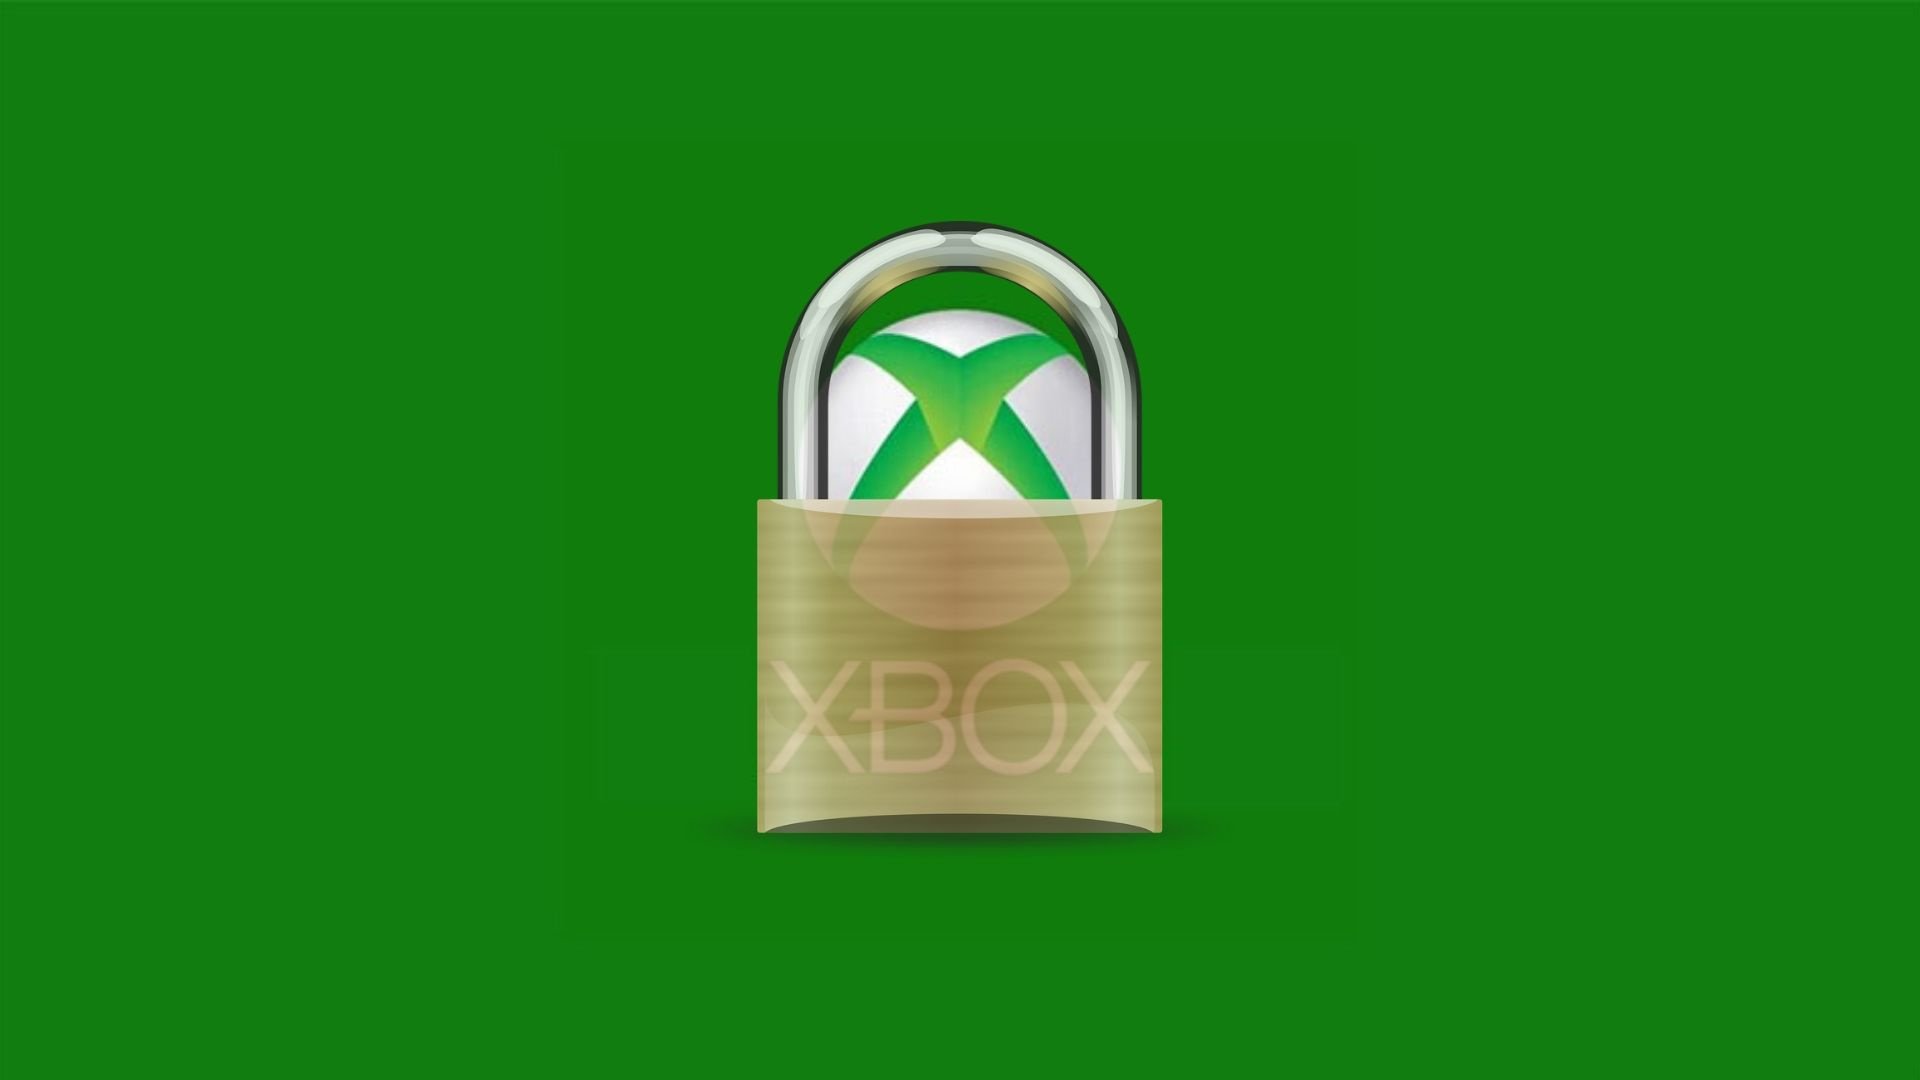 How To Enable 2fa For Added Security On Xbox Guide Xbox News